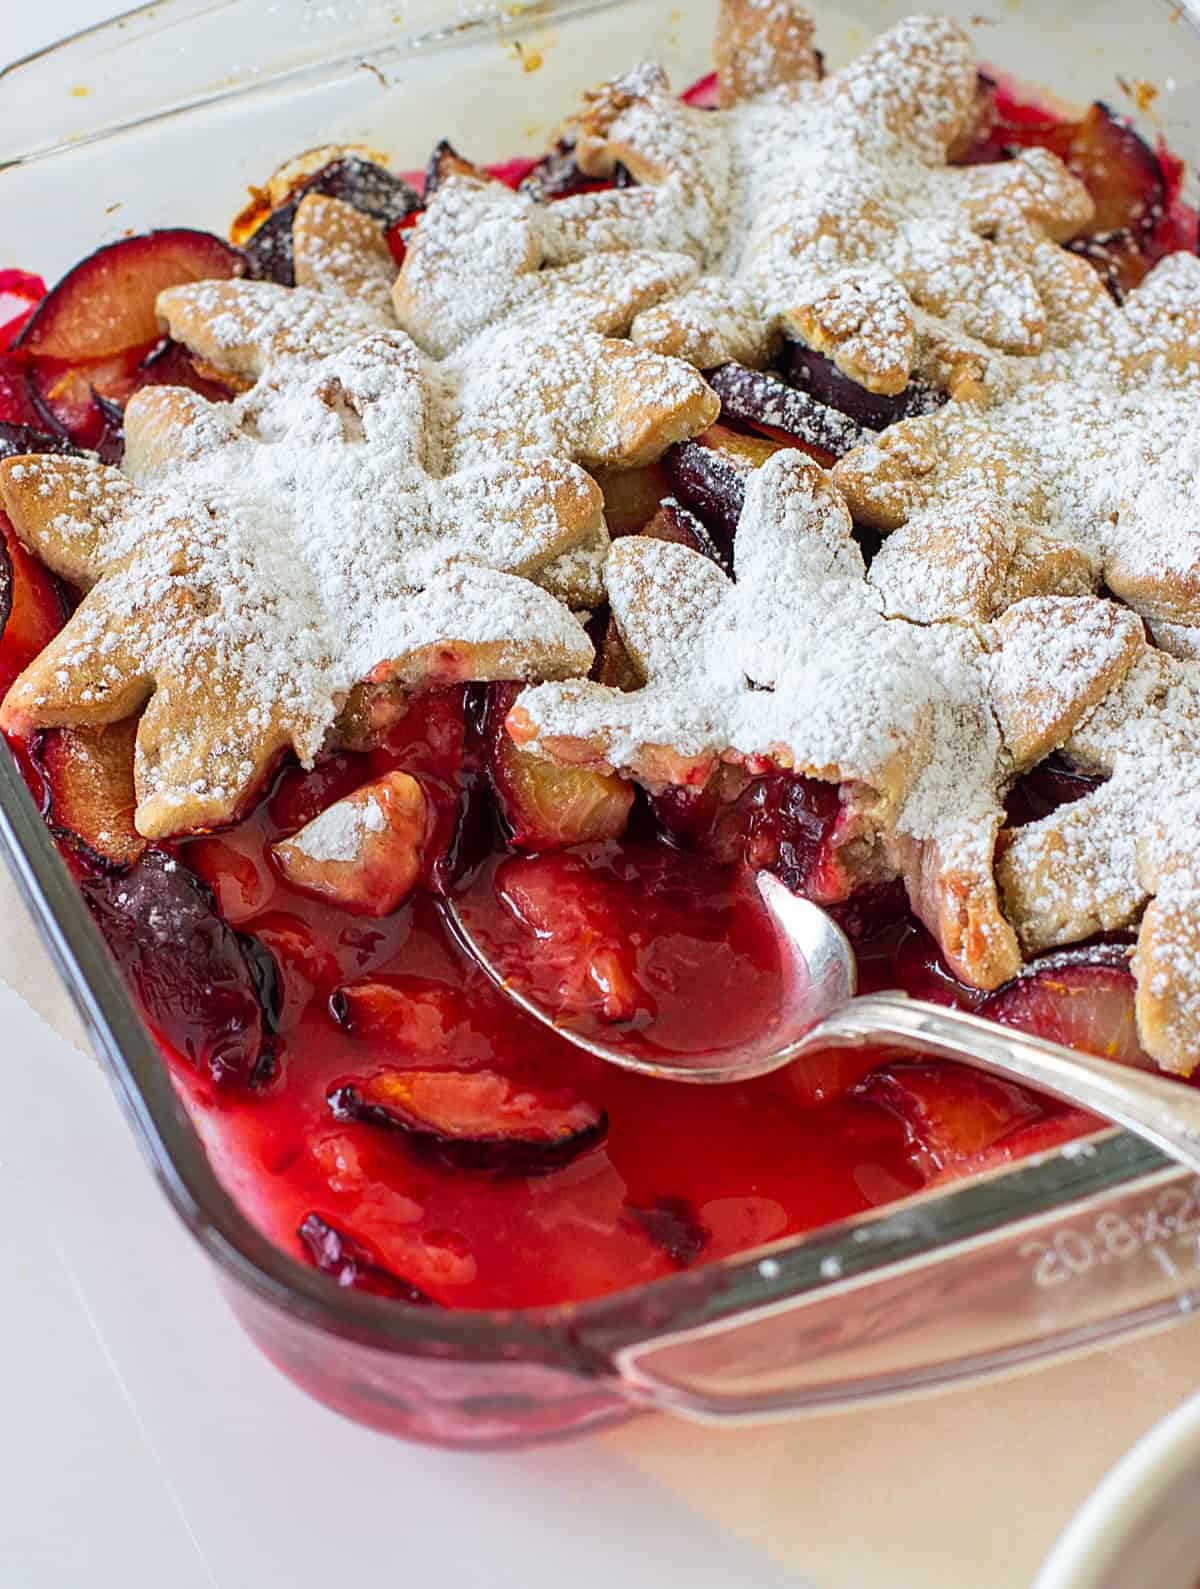 Glass dish with plum cobbler made with a pie crust topping, a silver spoon inside 